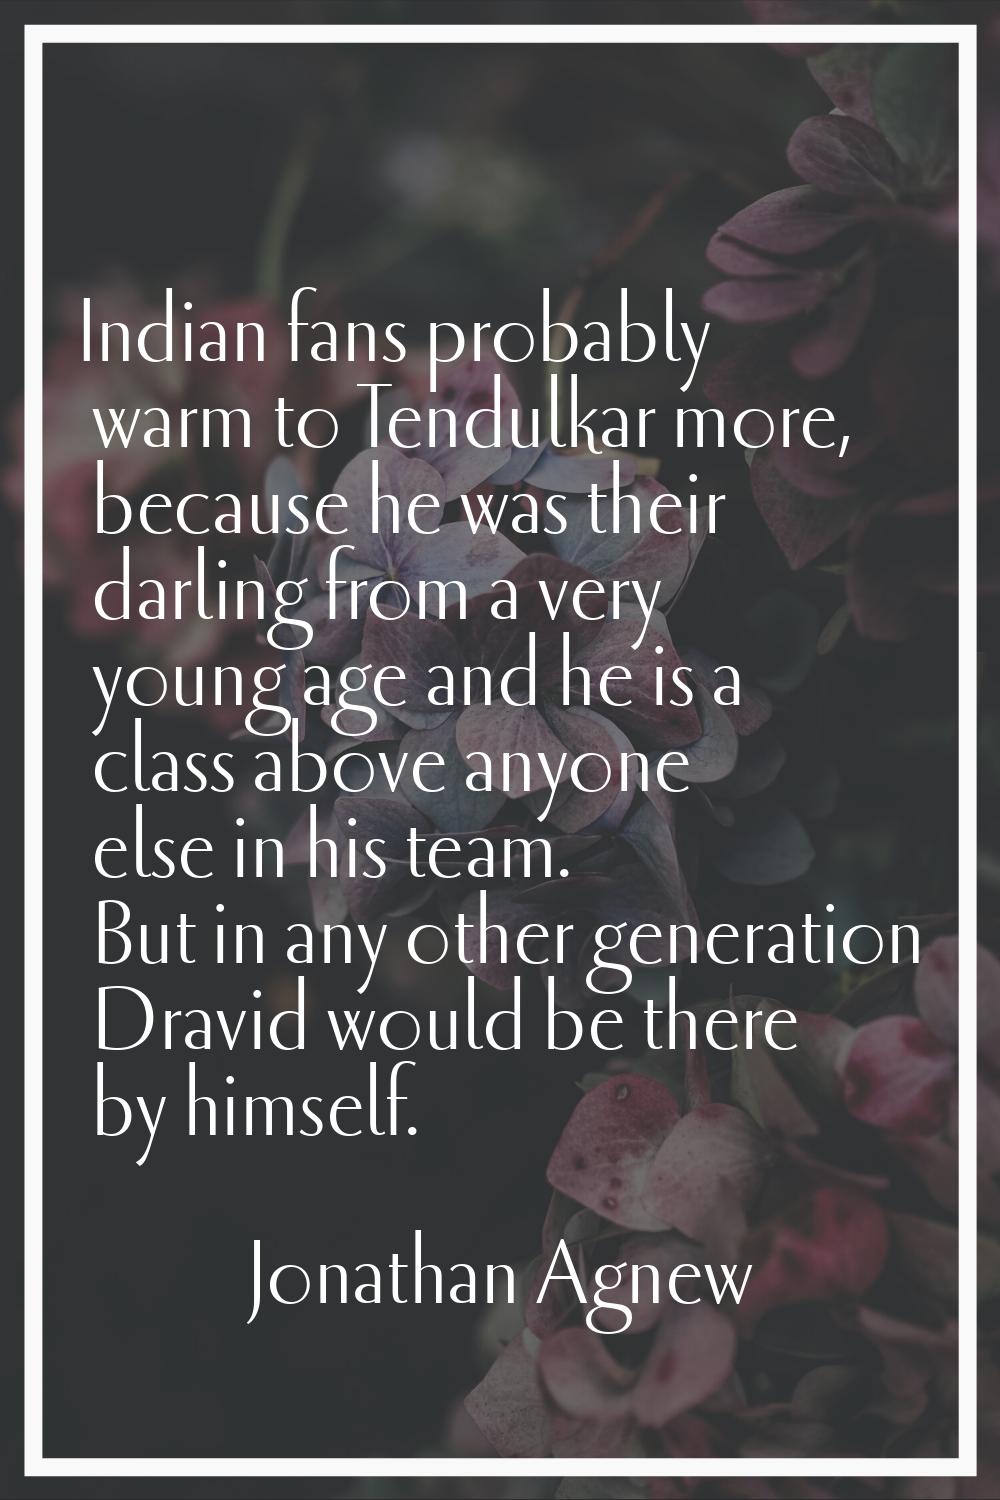 Indian fans probably warm to Tendulkar more, because he was their darling from a very young age and